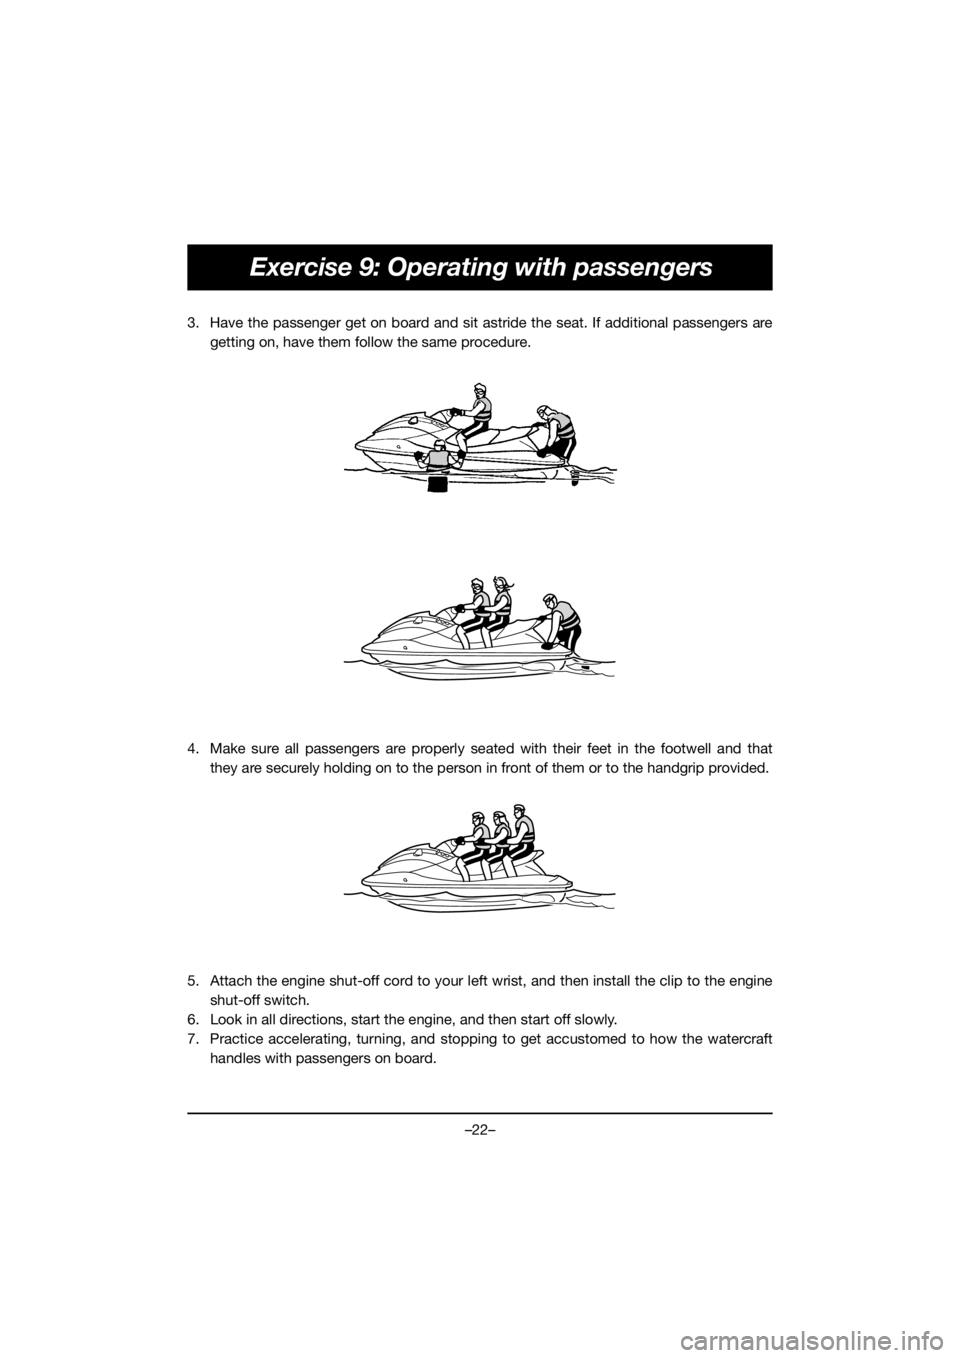 YAMAHA EXR 2020  Owners Manual –22–
Exercise 9: Operating with passengers
3. Have the passenger get on board and sit astride the seat. If additional passengers are
getting on, have them follow the same procedure. 
4. Make sure 